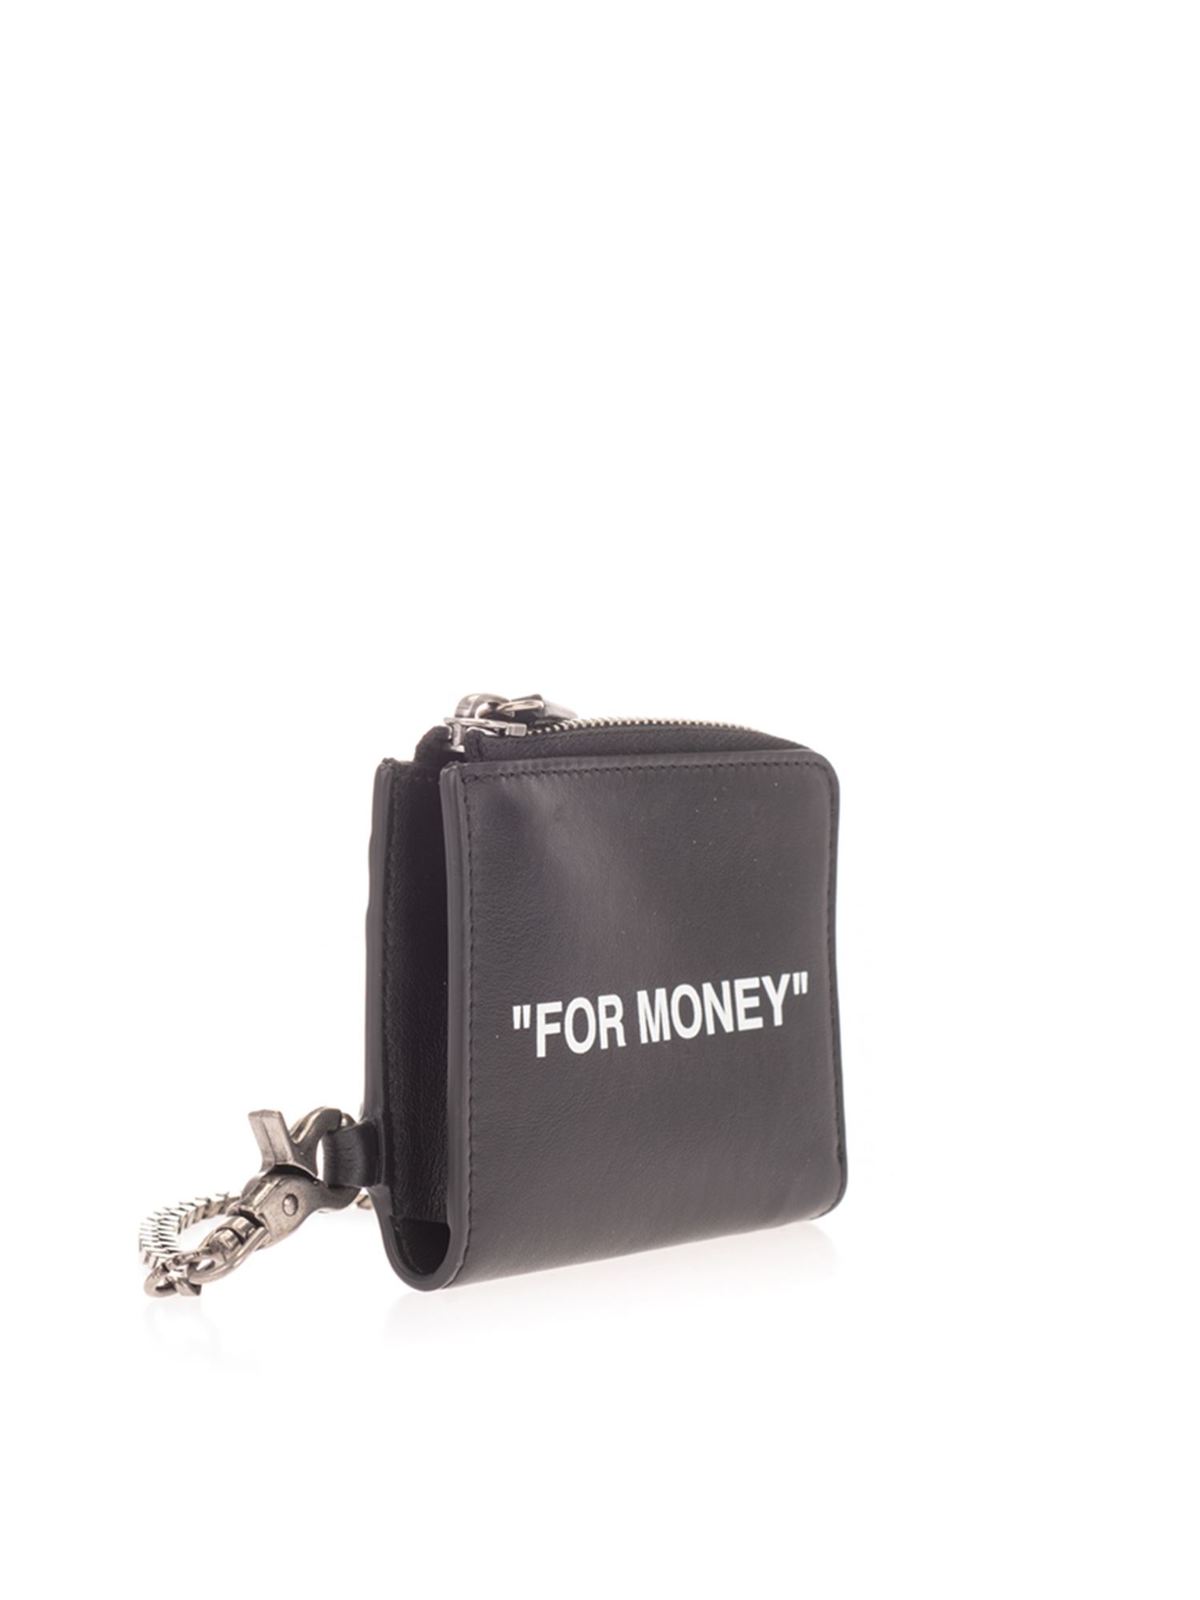 Money purse hand Black and White Stock Photos & Images - Page 2 - Alamy